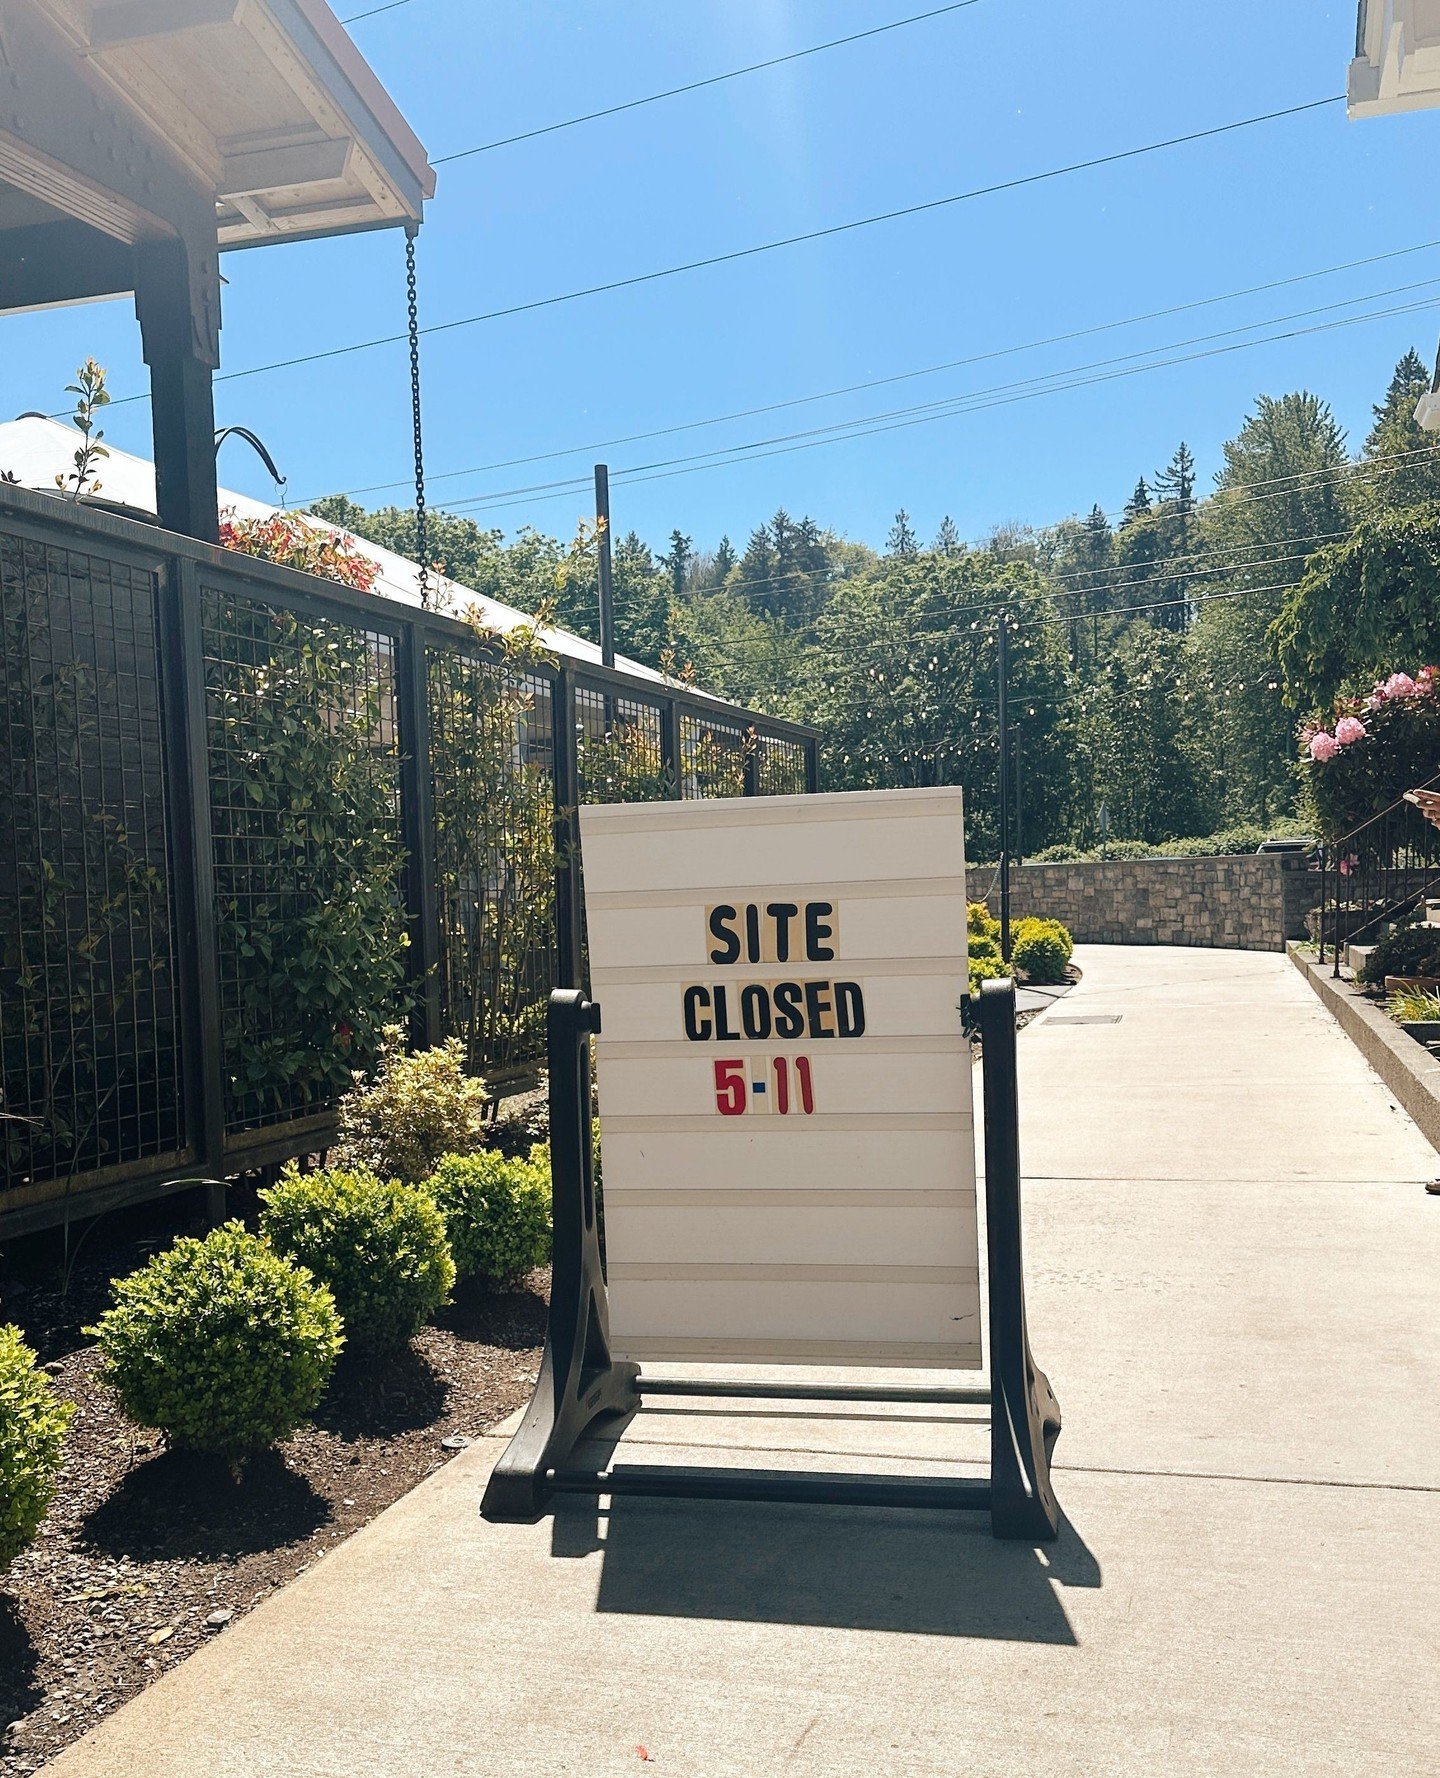 Saturday, May 11th - our entire site (Farm 12 Restaurant &amp; Fika) will be closed for a site wide event benefitting @stepbystepnews. ⁠
⁠
We look forward to serving you and your families on Mother's Day!